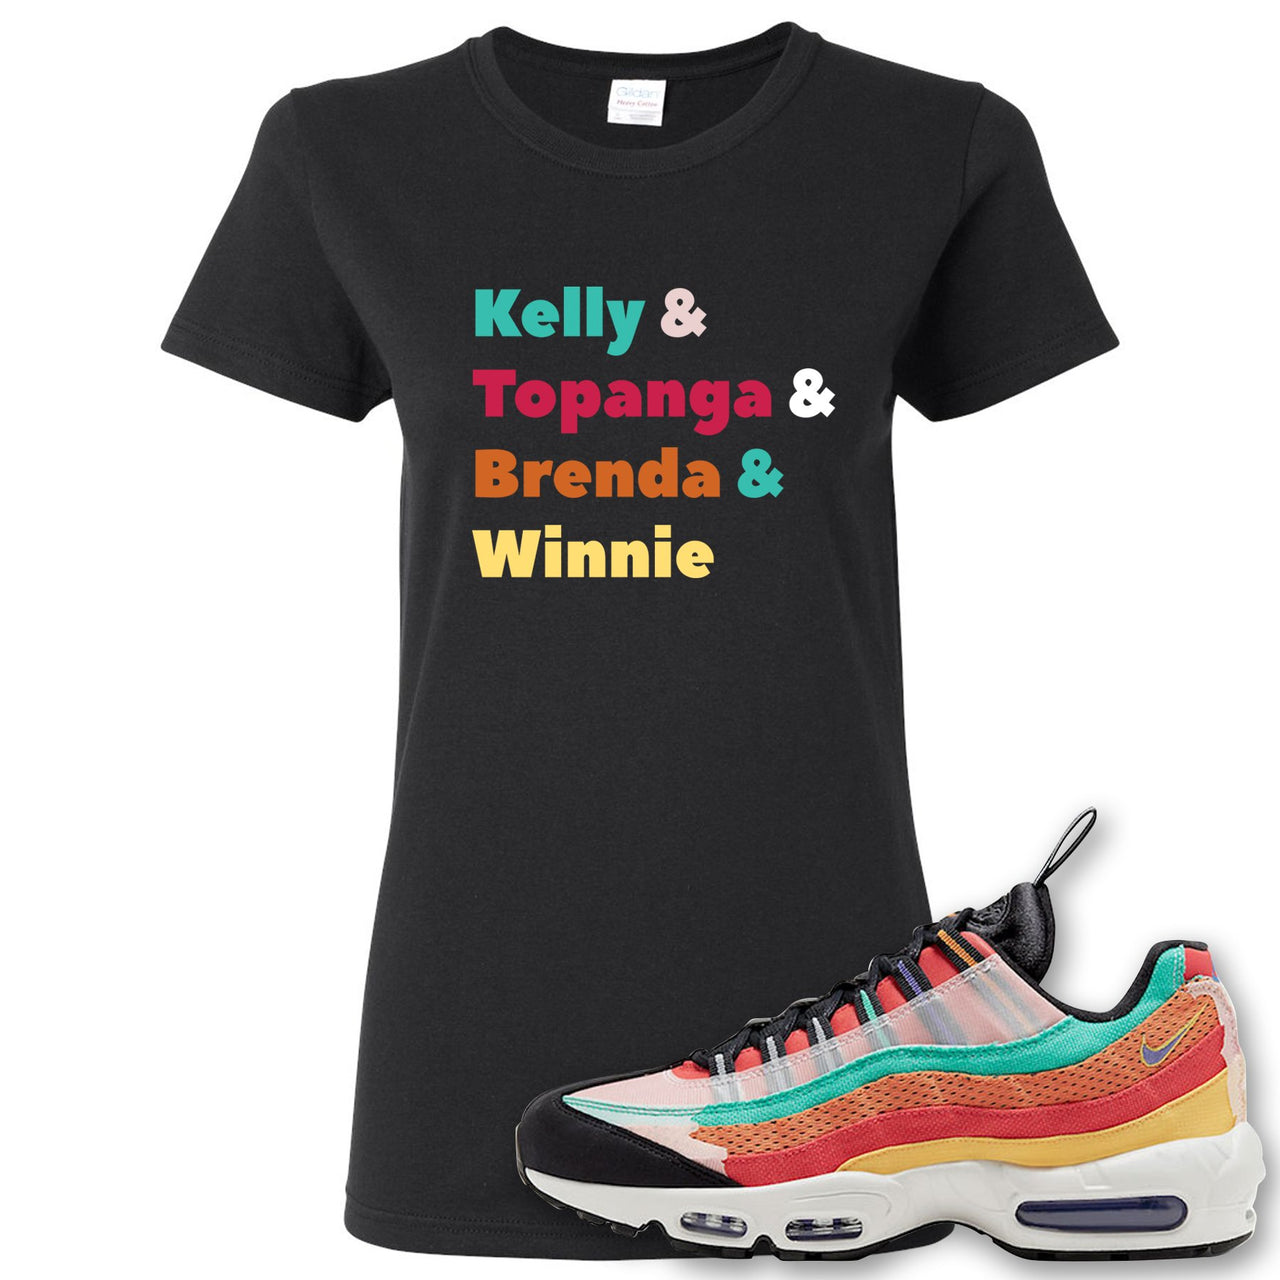 Air Max 95 Black History Month Sneaker Black Women's T Shirt | Women's Tees to match Nike Air Max 95 Black History Month Shoes | Kelly And Gang